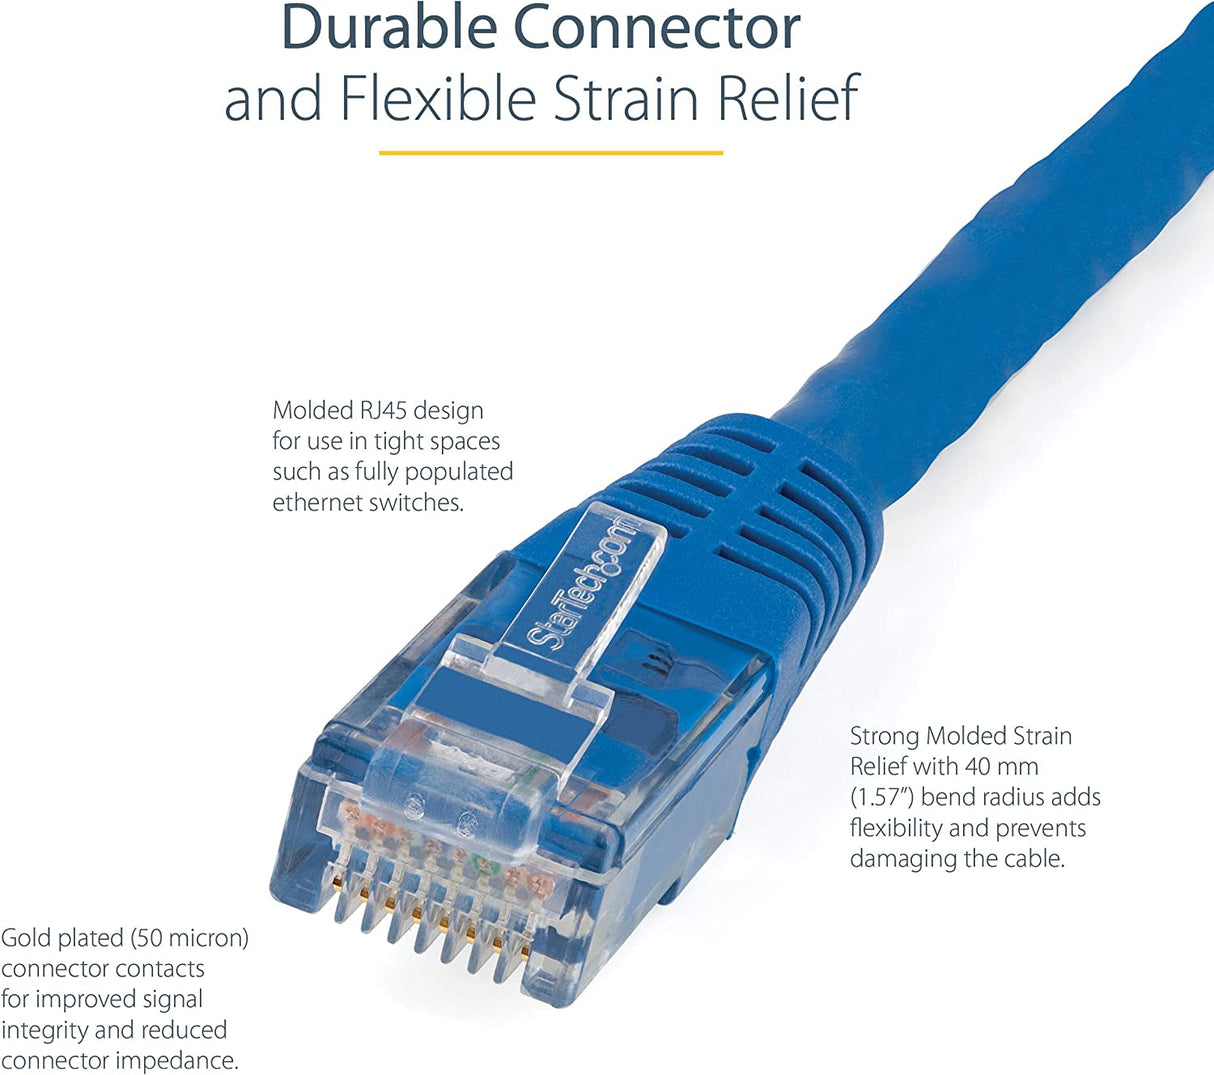 StarTech.com 7ft CAT6 Ethernet Cable - Blue CAT 6 Gigabit Ethernet Wire -650MHz 100W PoE++ RJ45 UTP Molded Category 6 Network/Patch Cord w/Strain Relief/Fluke Tested UL/TIA Certified (C6PATCH7BL) Blue 7 ft / 2.1 m 1 Pack